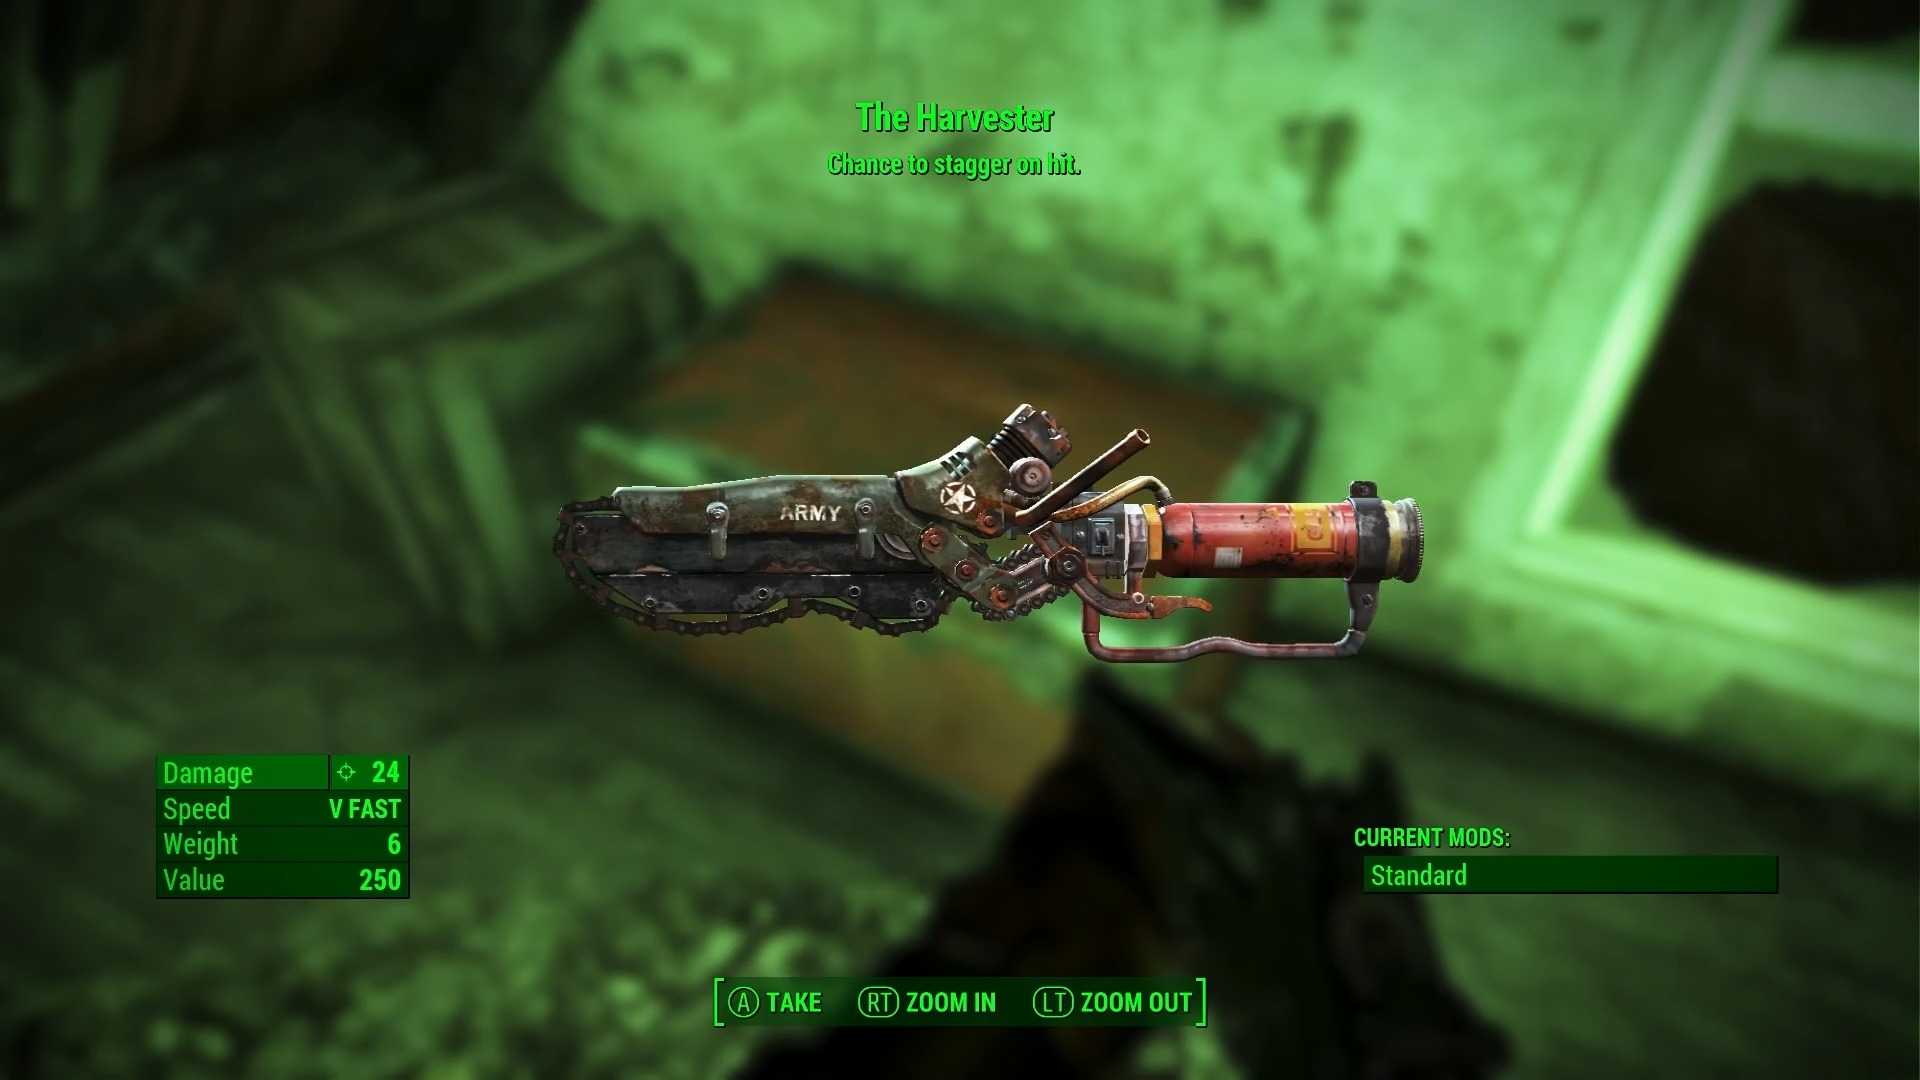 The Harvester in Fallout 4